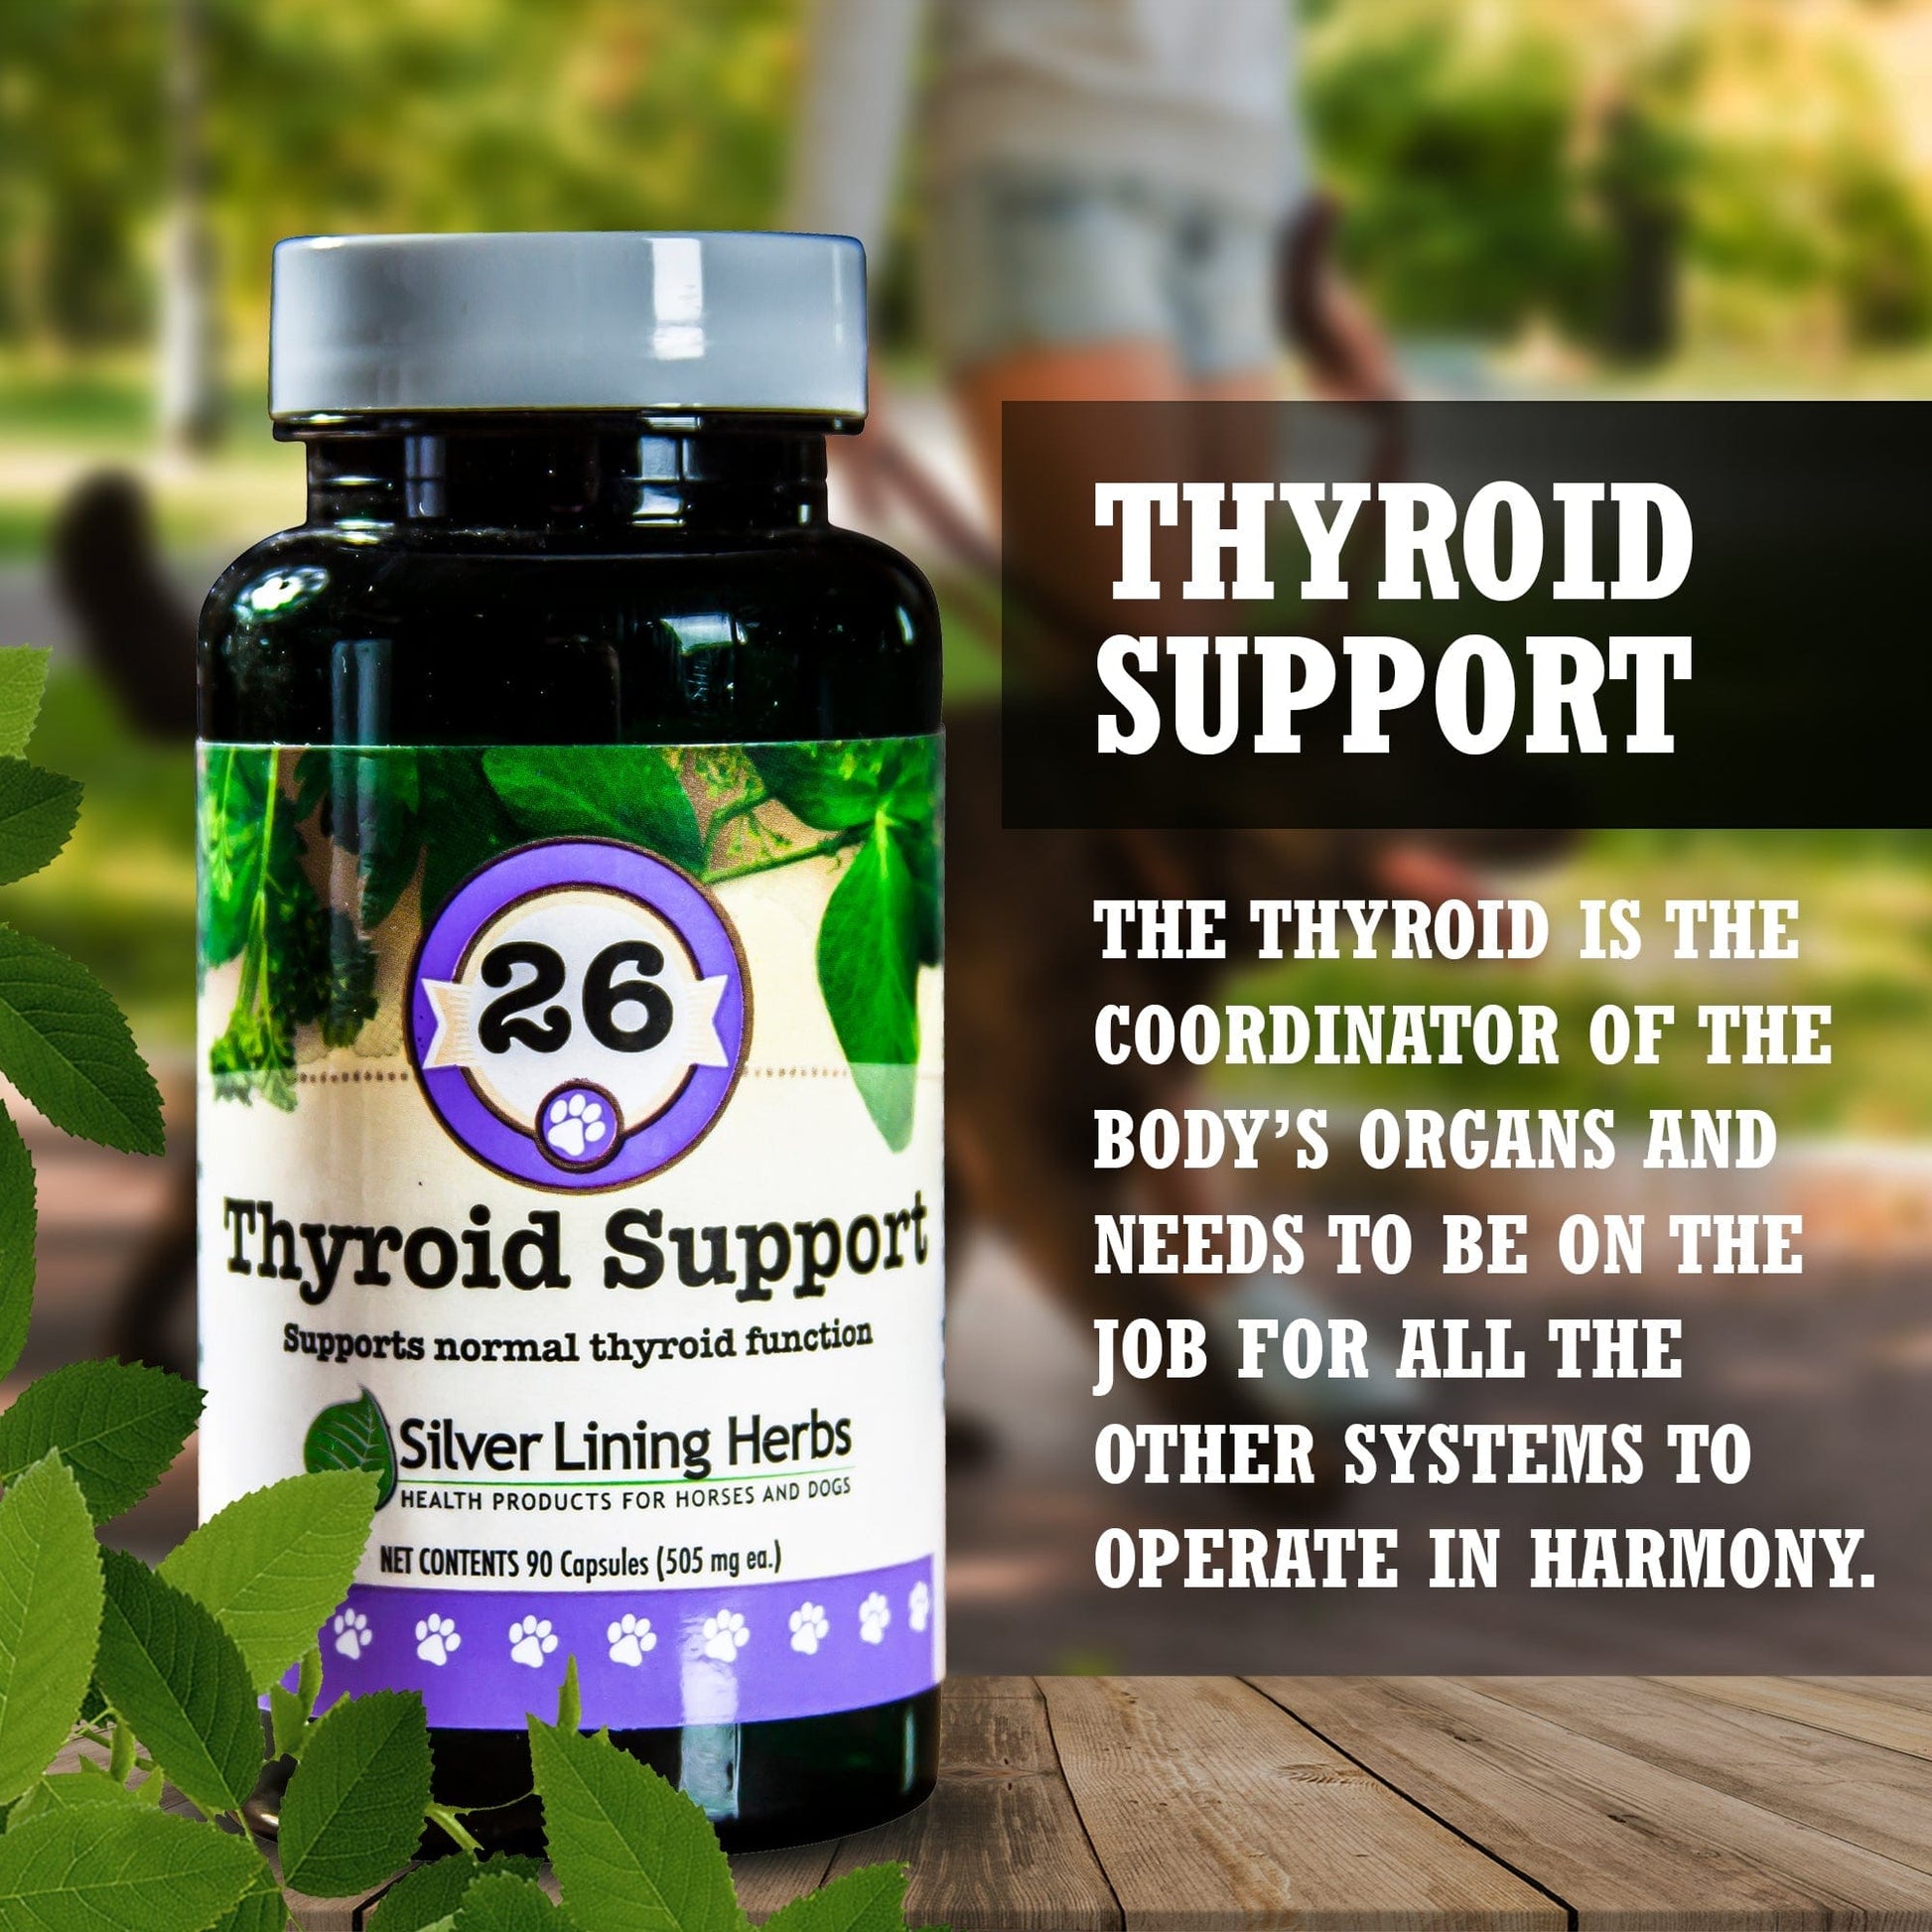 A bottle of #26 Thyroid Support for Dogs with an explanation of why the thyroid is vital to dogs’ health